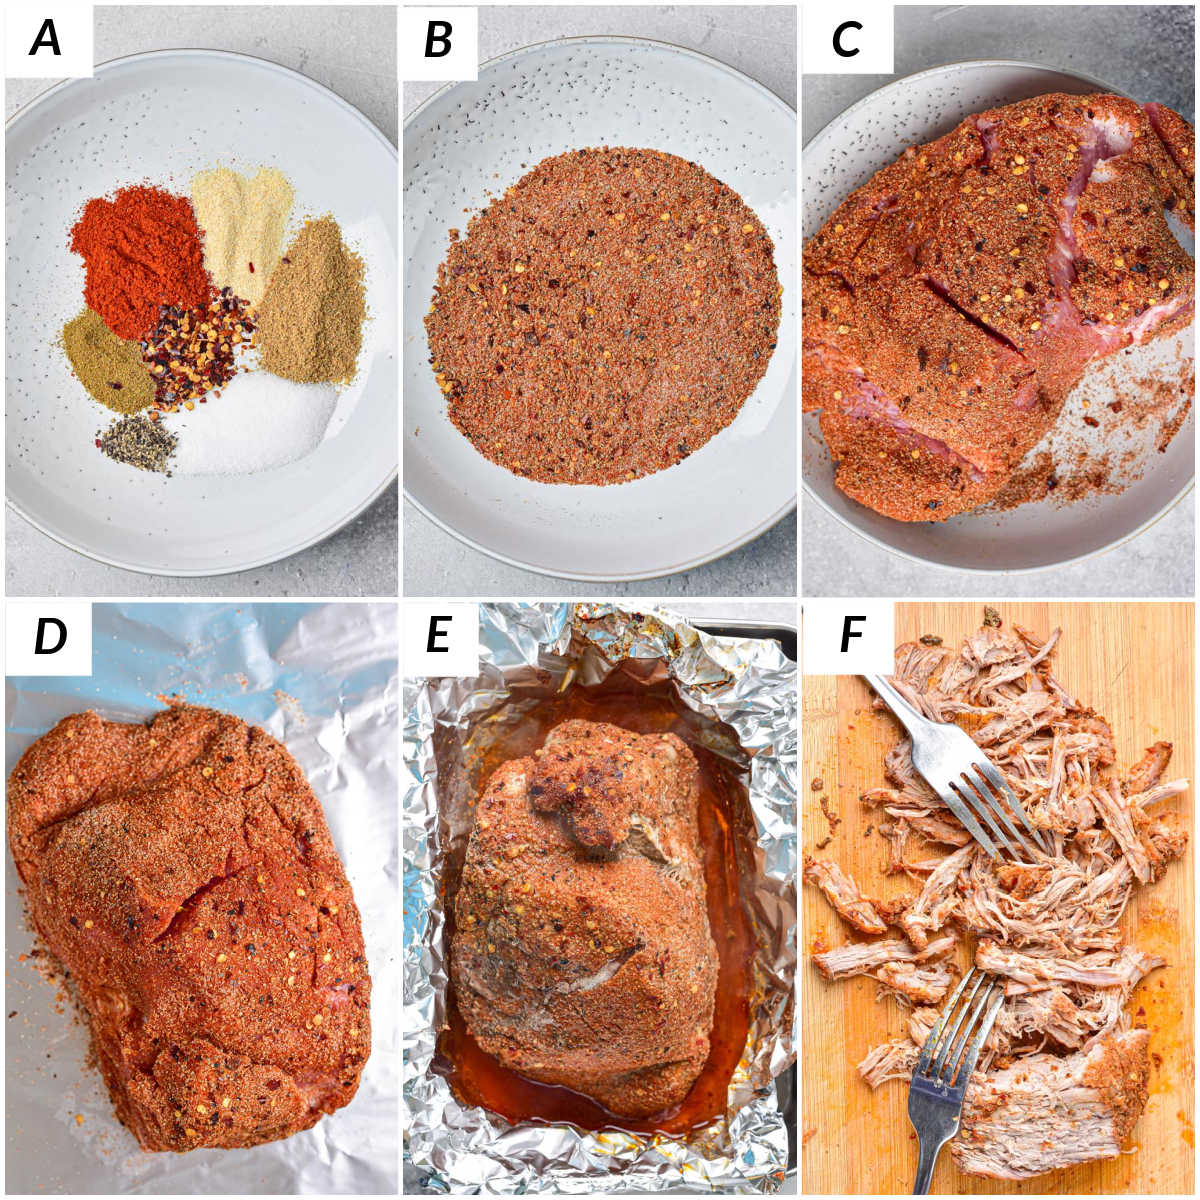 image collage showing the steps for how to make pulled pork on charcoal grill